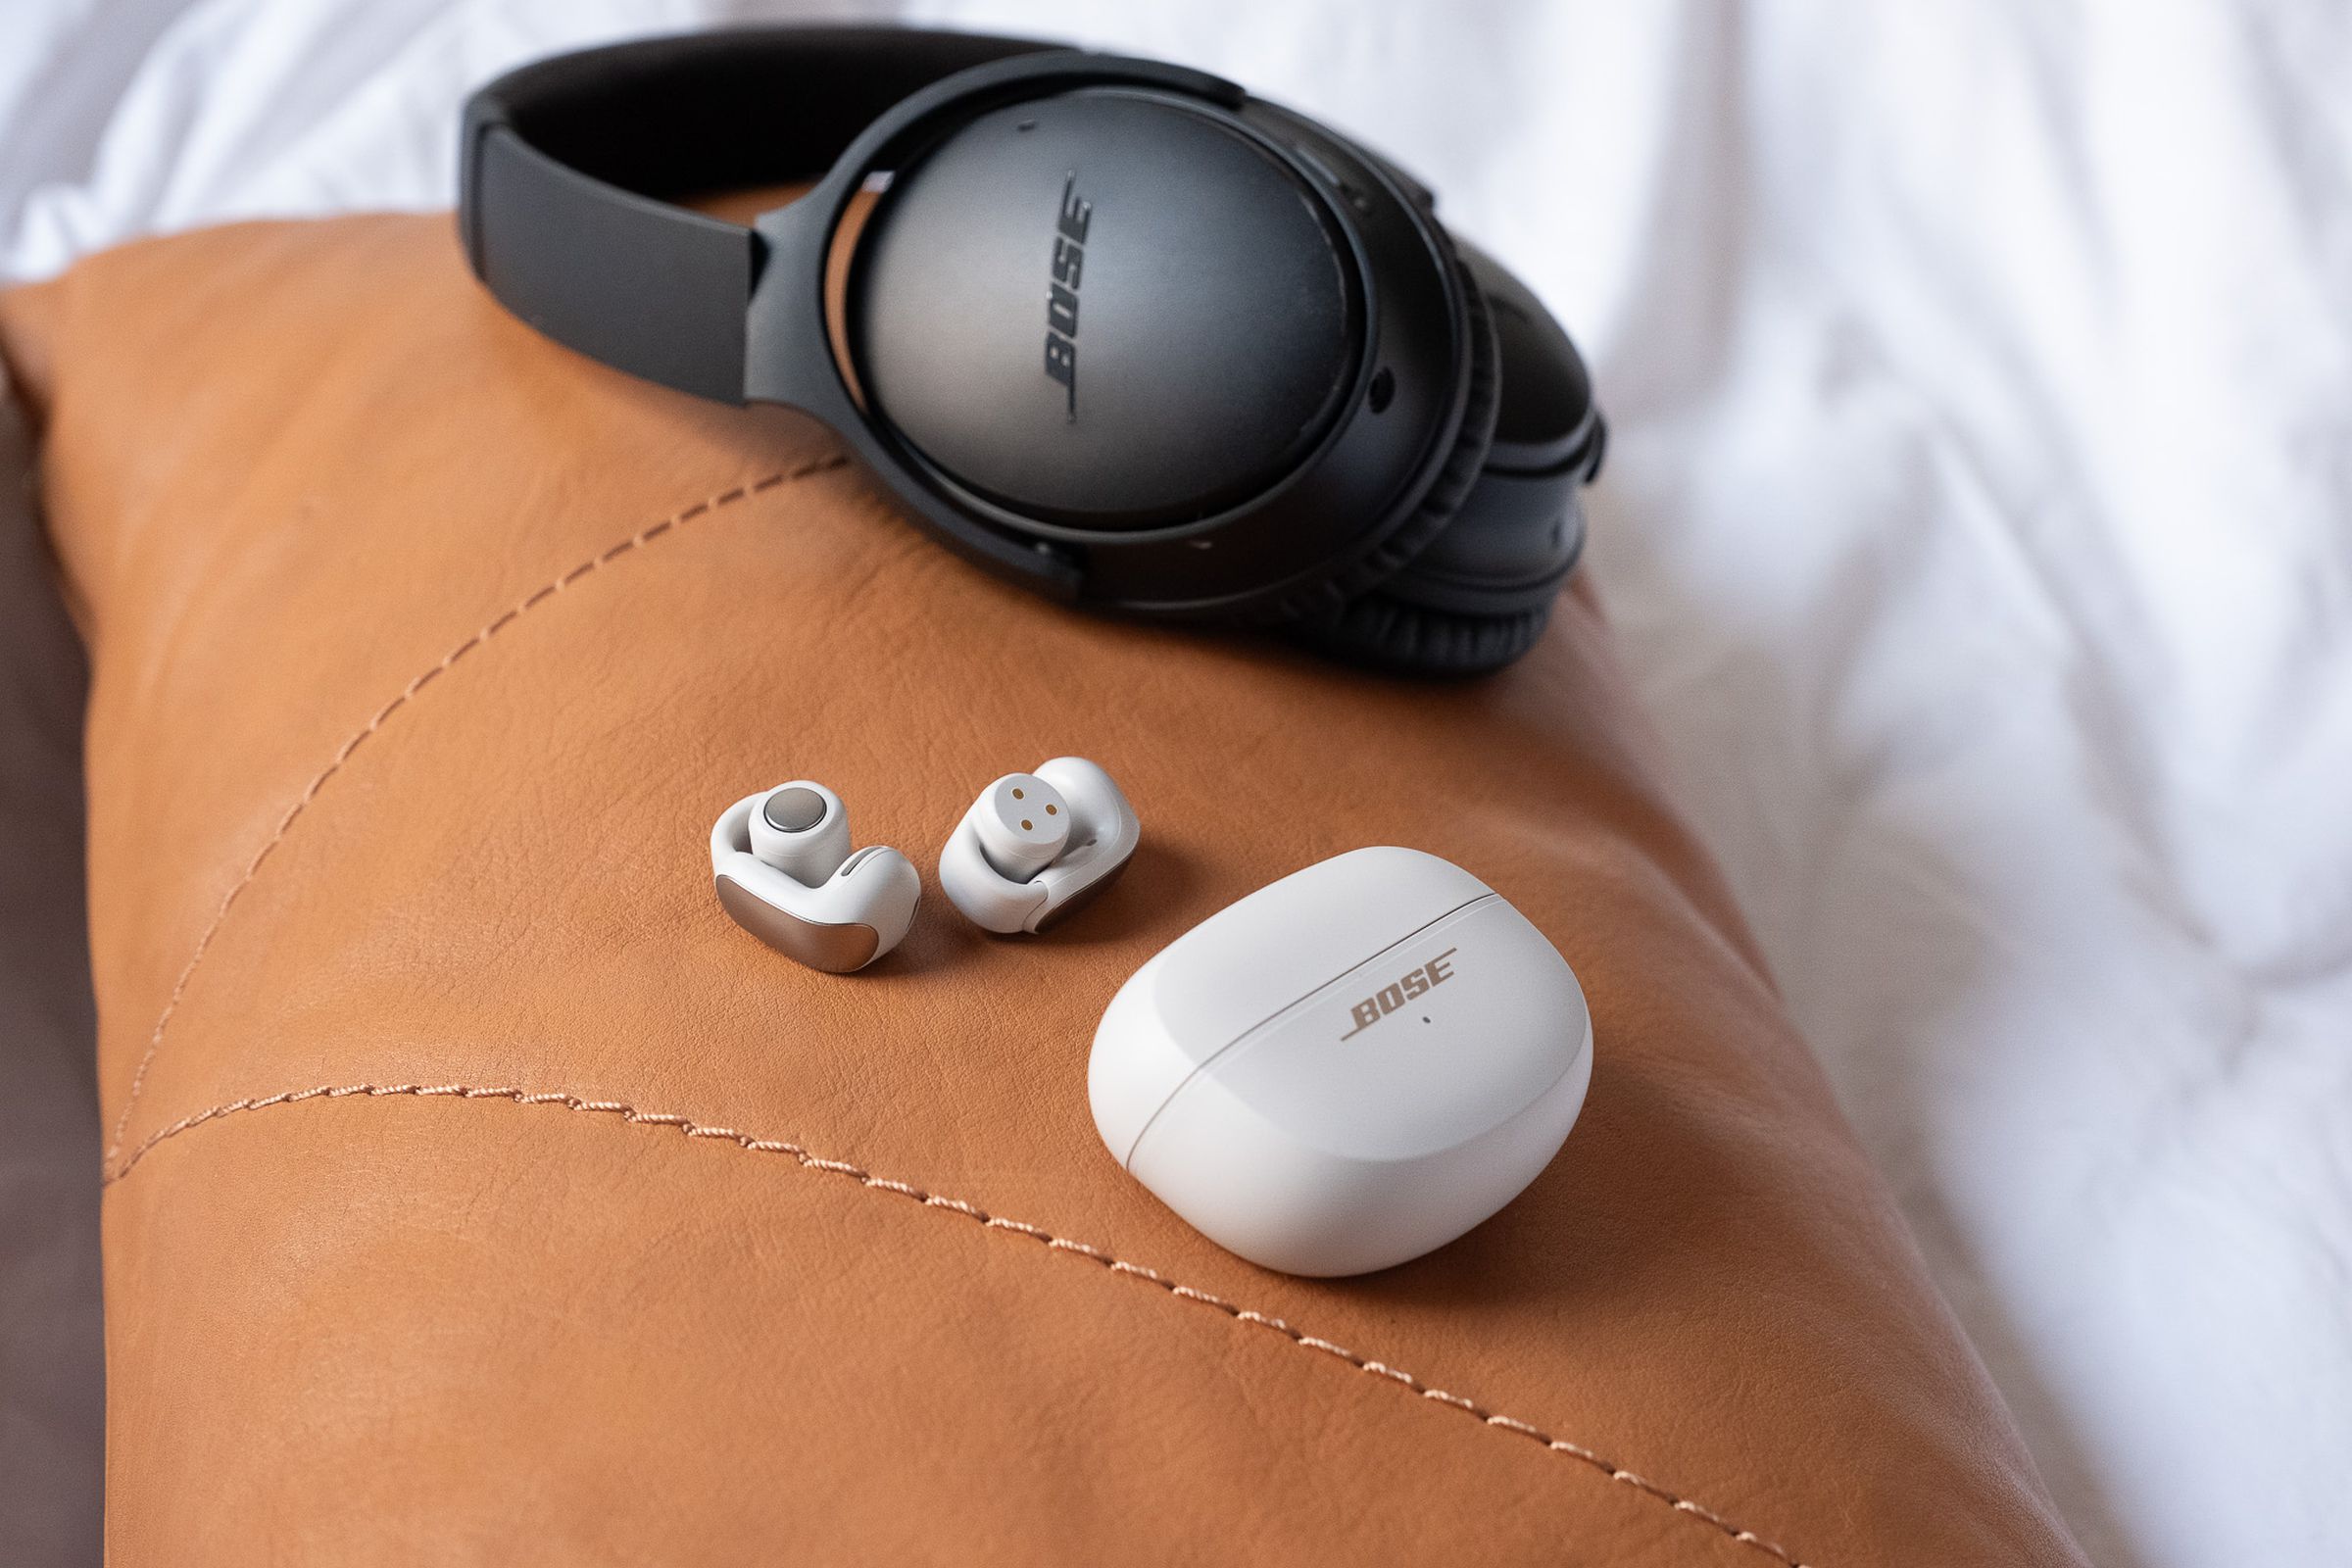 A photo of Bose’s Ultra Open Earbuds.